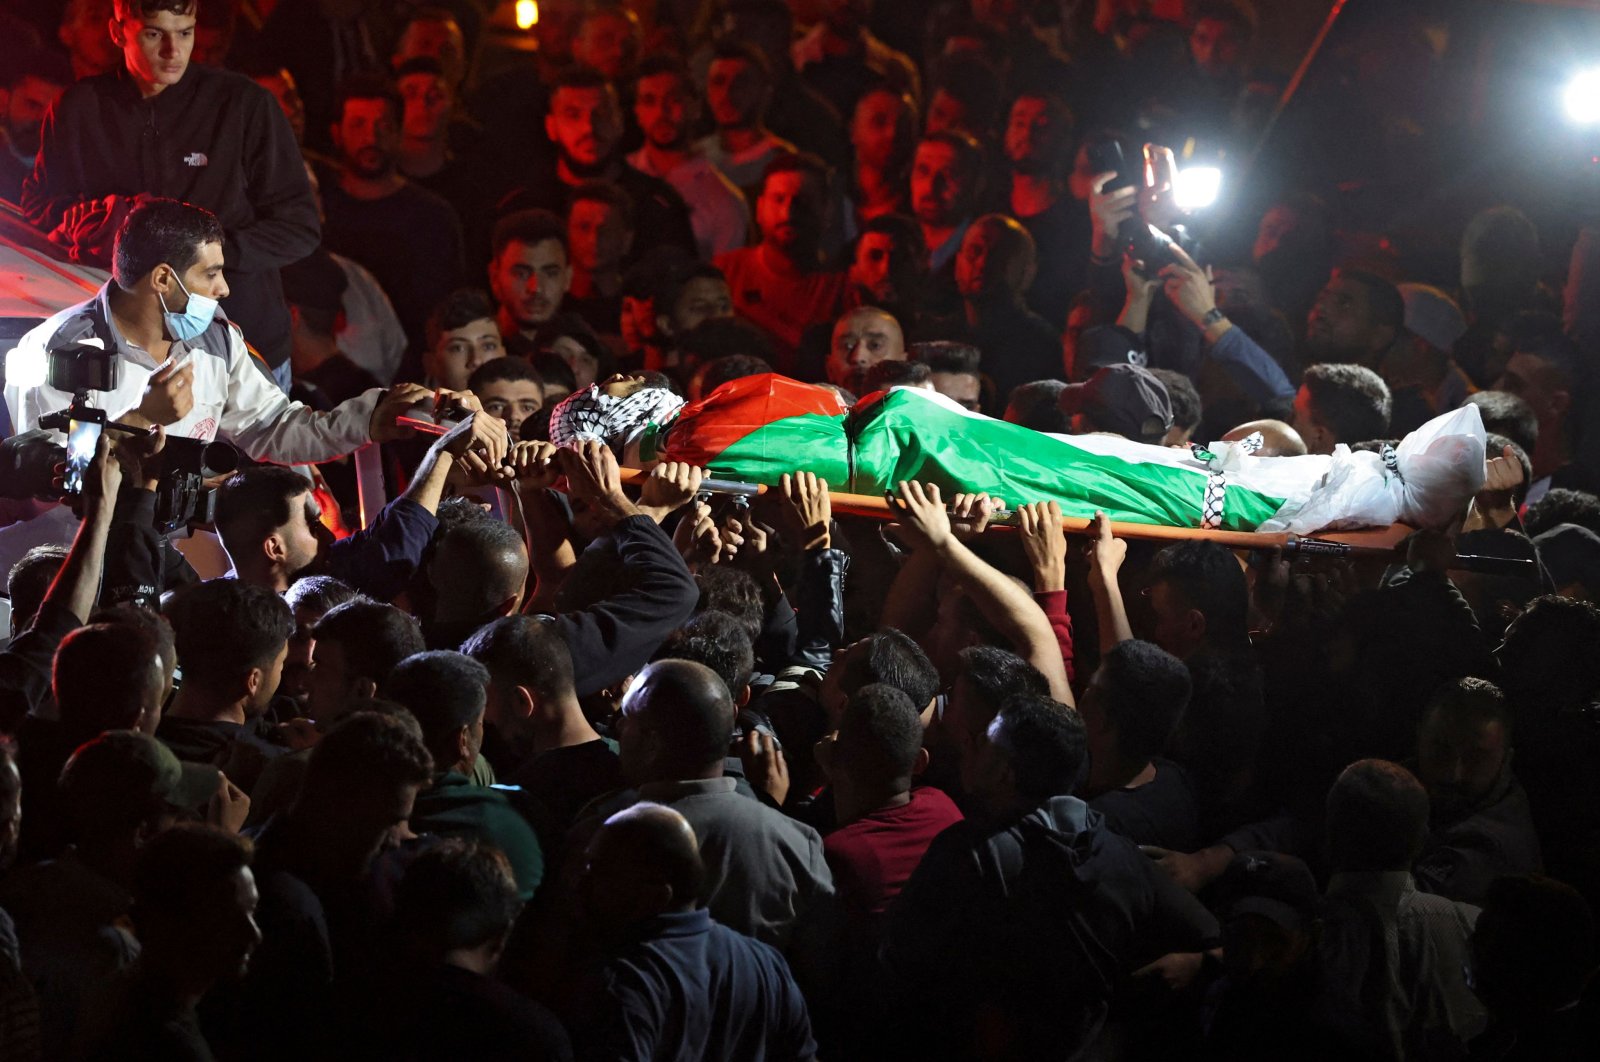 Mourners carry the body of Mohammed Khabisa, a Palestinian who was shot dead by Israeli troops, during his funeral in the village of Beita, the occupied West Bank, Palestine, Sept. 24, 2021. (AFP Photo)